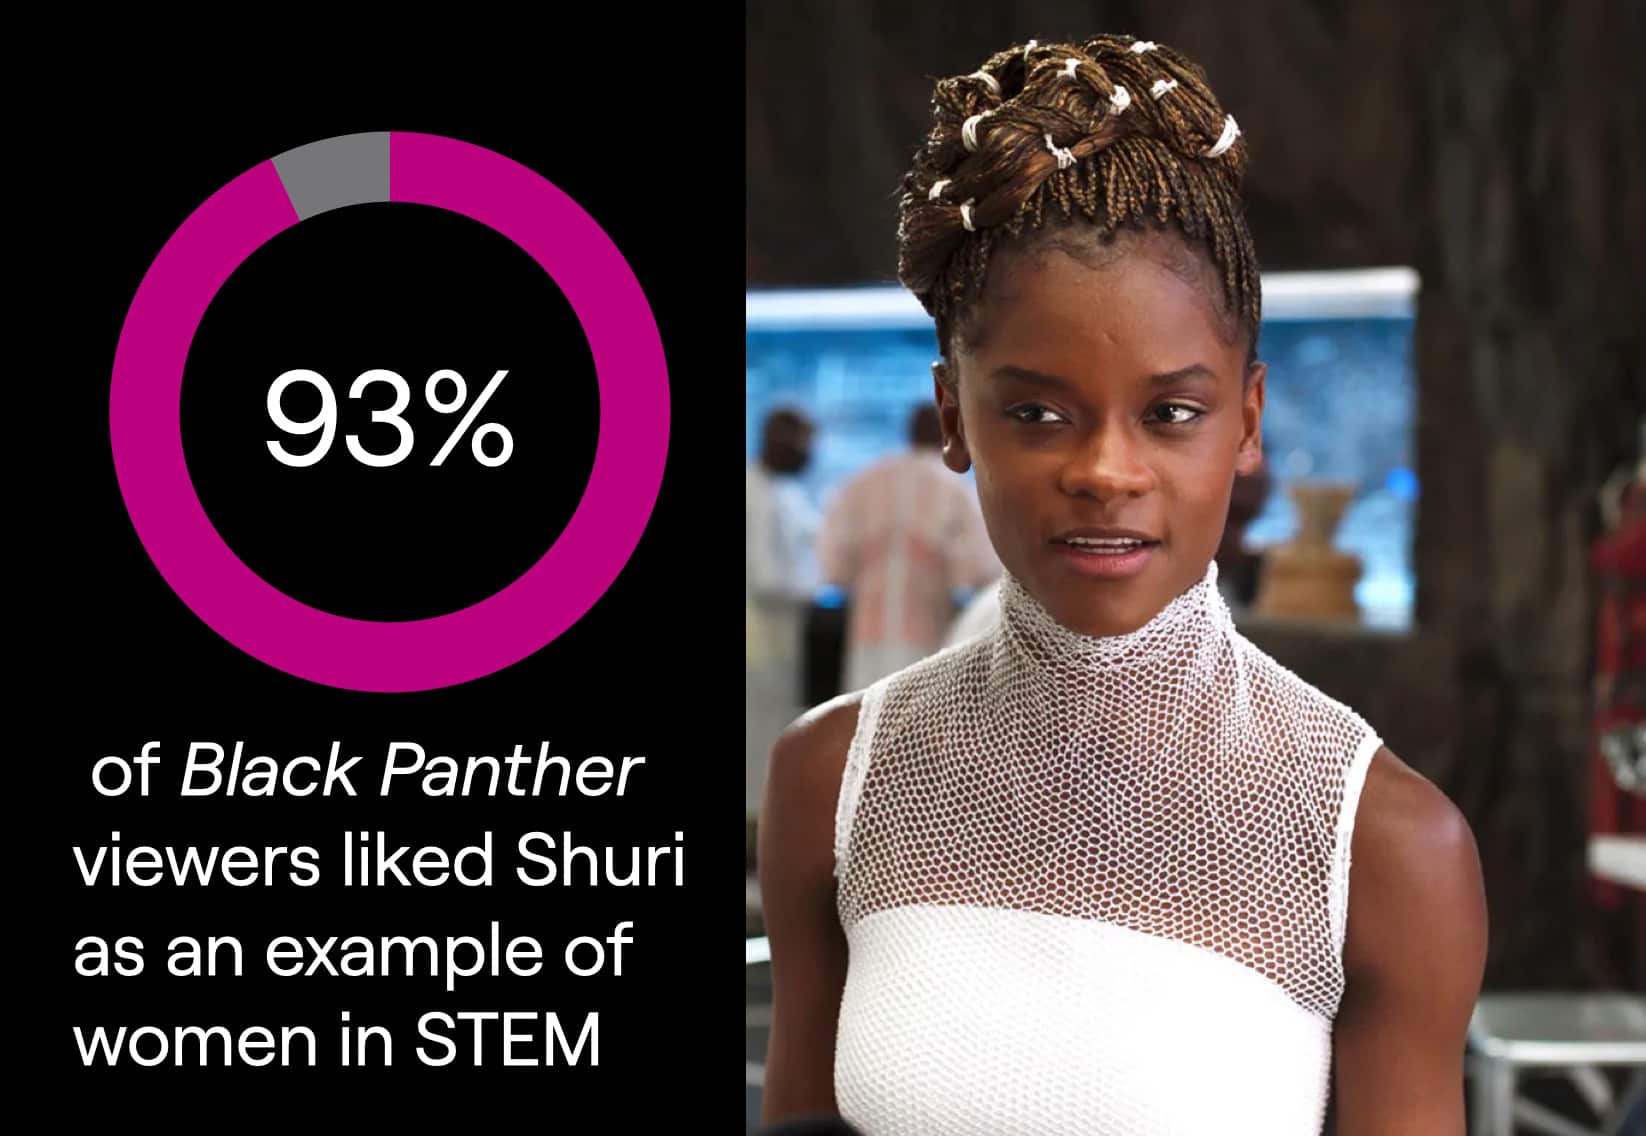 93% of black panther viewers liked Shuri as an example of women in STEM